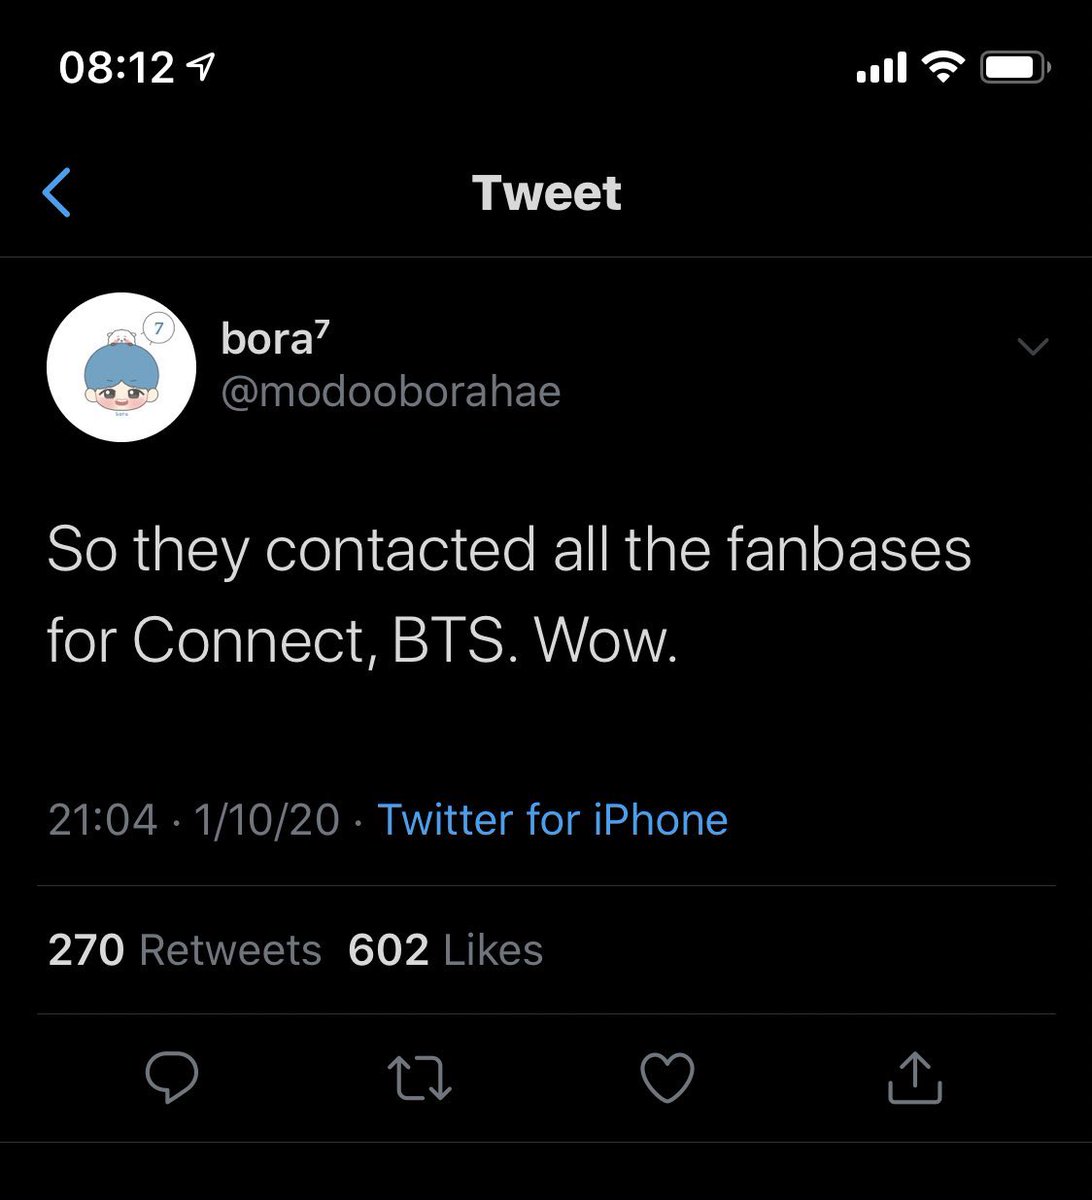 ARMYs were speculating that J/M had gifted J/K the NBC snow globe from Paris. Bora slammed everyone for “making assumptions” when she often makes hasty false assumptions herself. It was only harmless speculation, but it seems Bora has something against J/M.